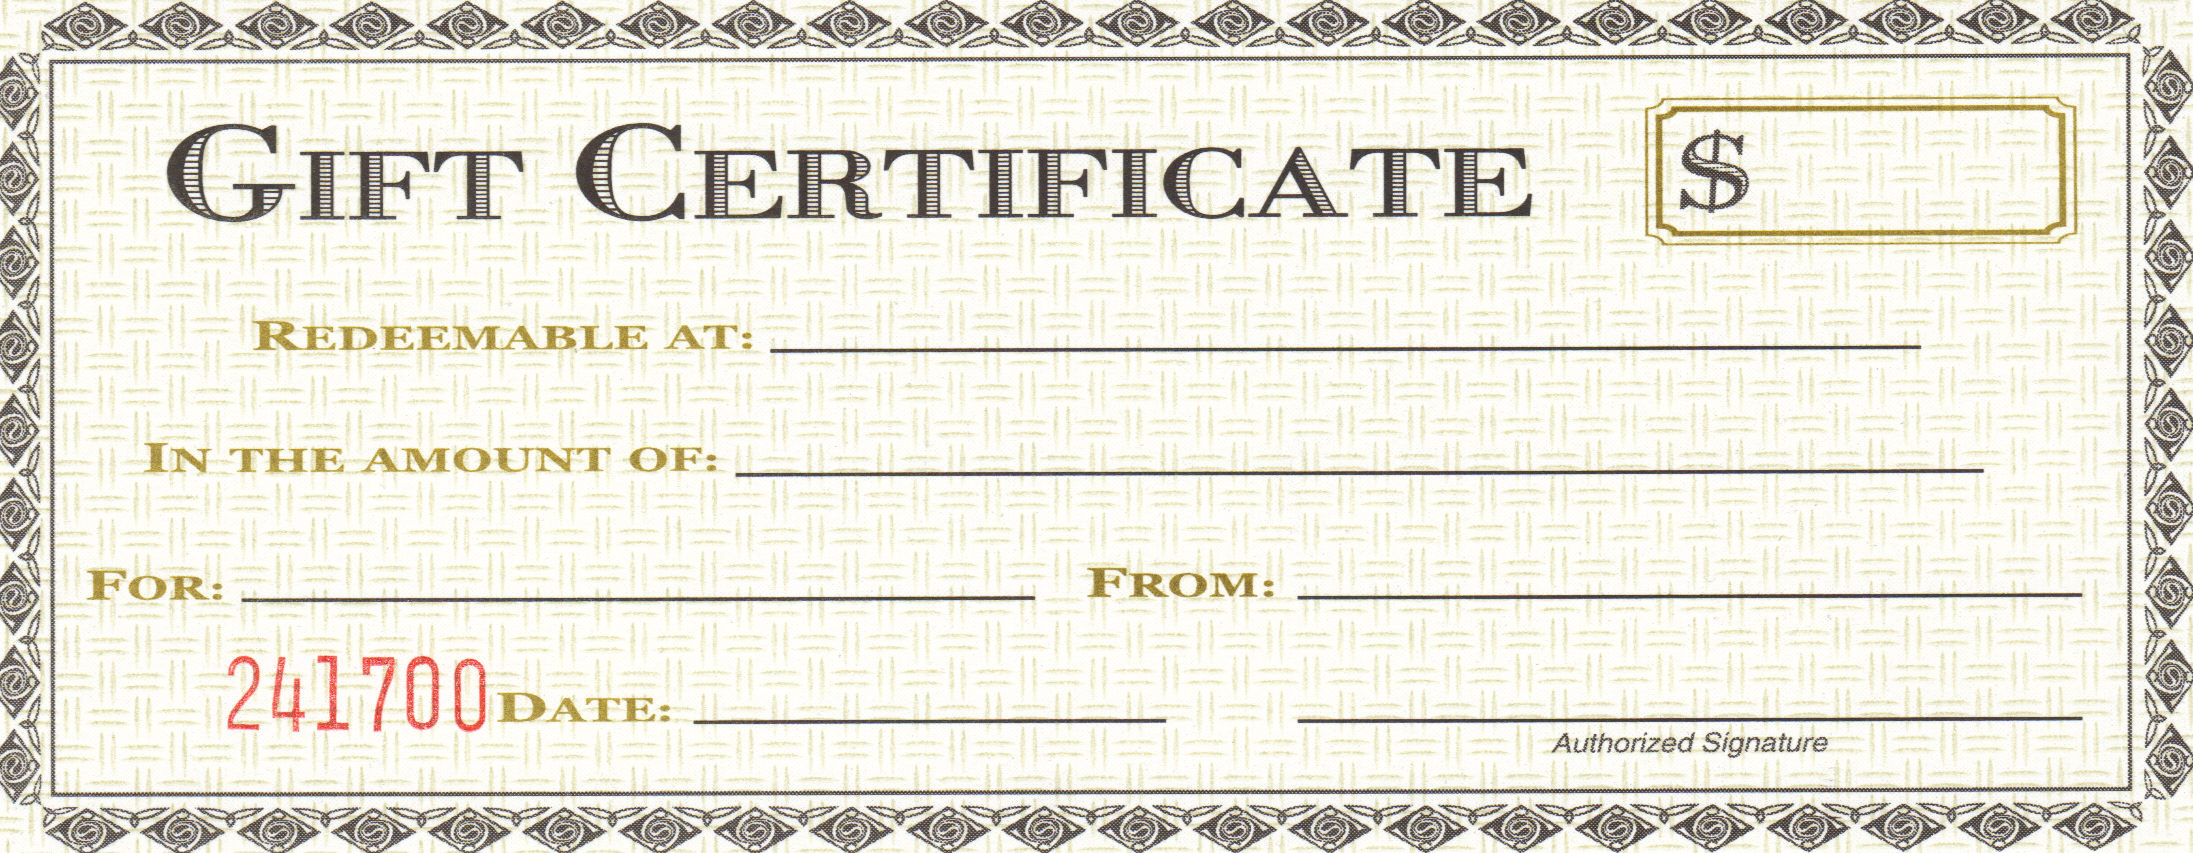 Free Printable Ferrier Gift Certificate Template